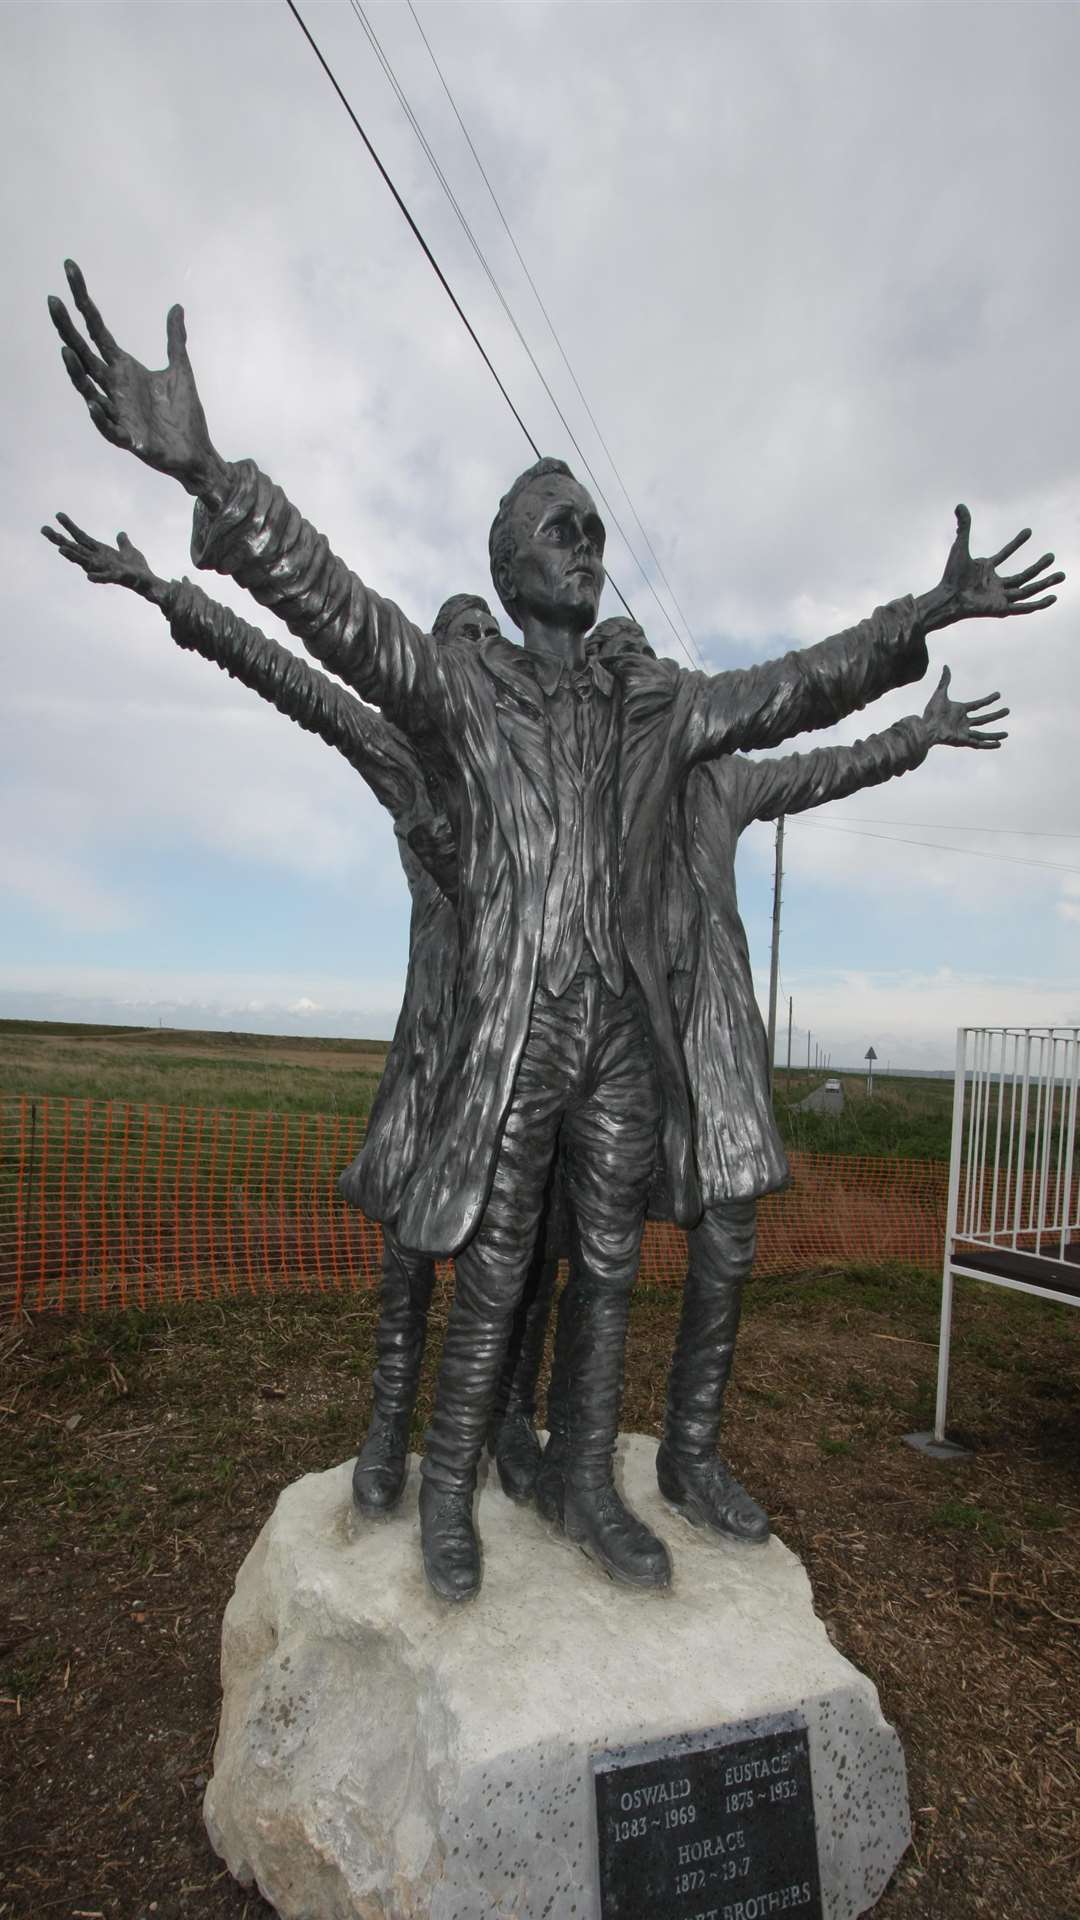 The Short Brothers are commemorated in a statue on Sheppey